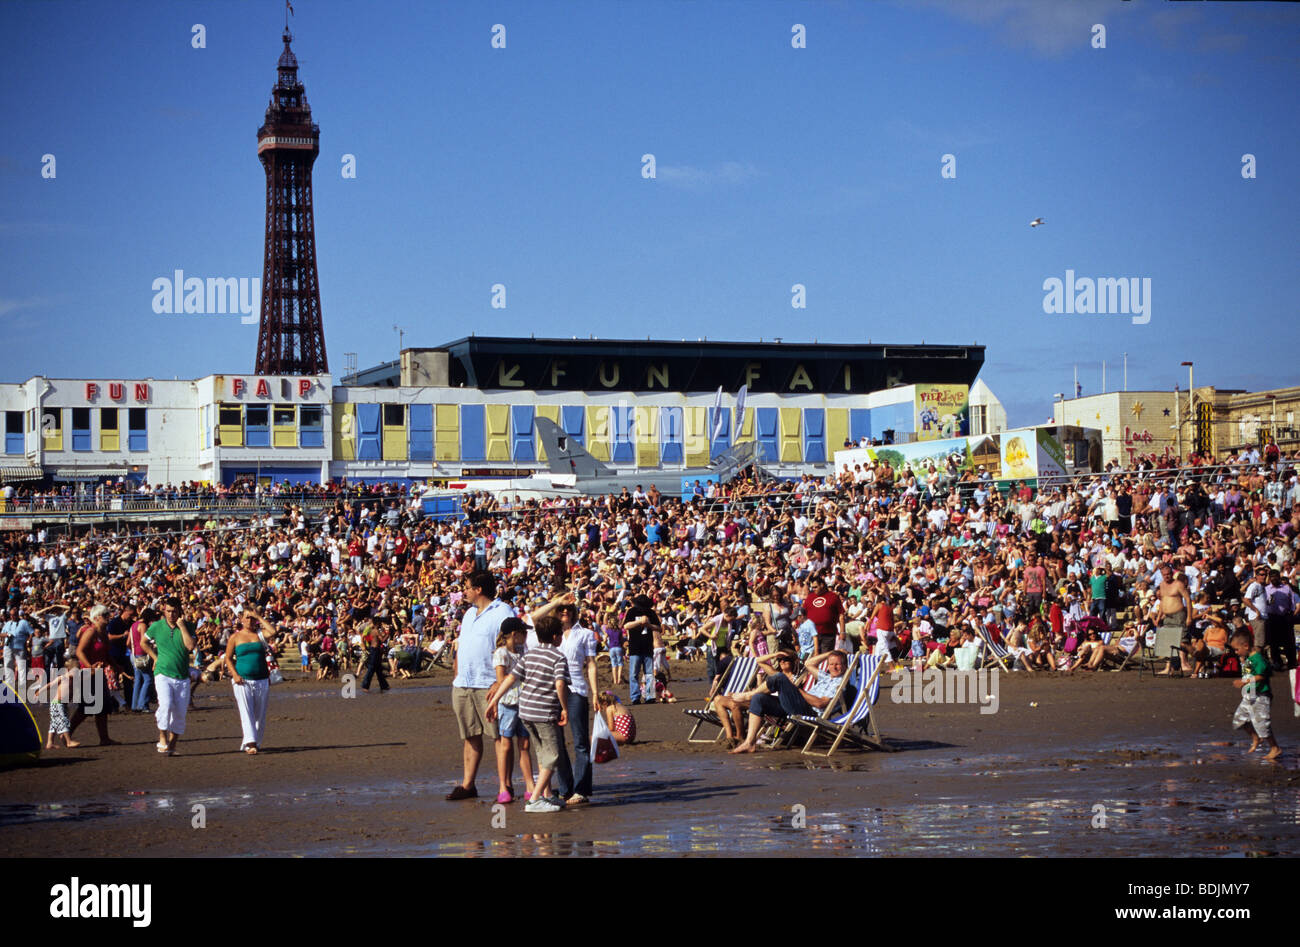 Hundreds Of People On The Beach At Blackpool Stock Photo